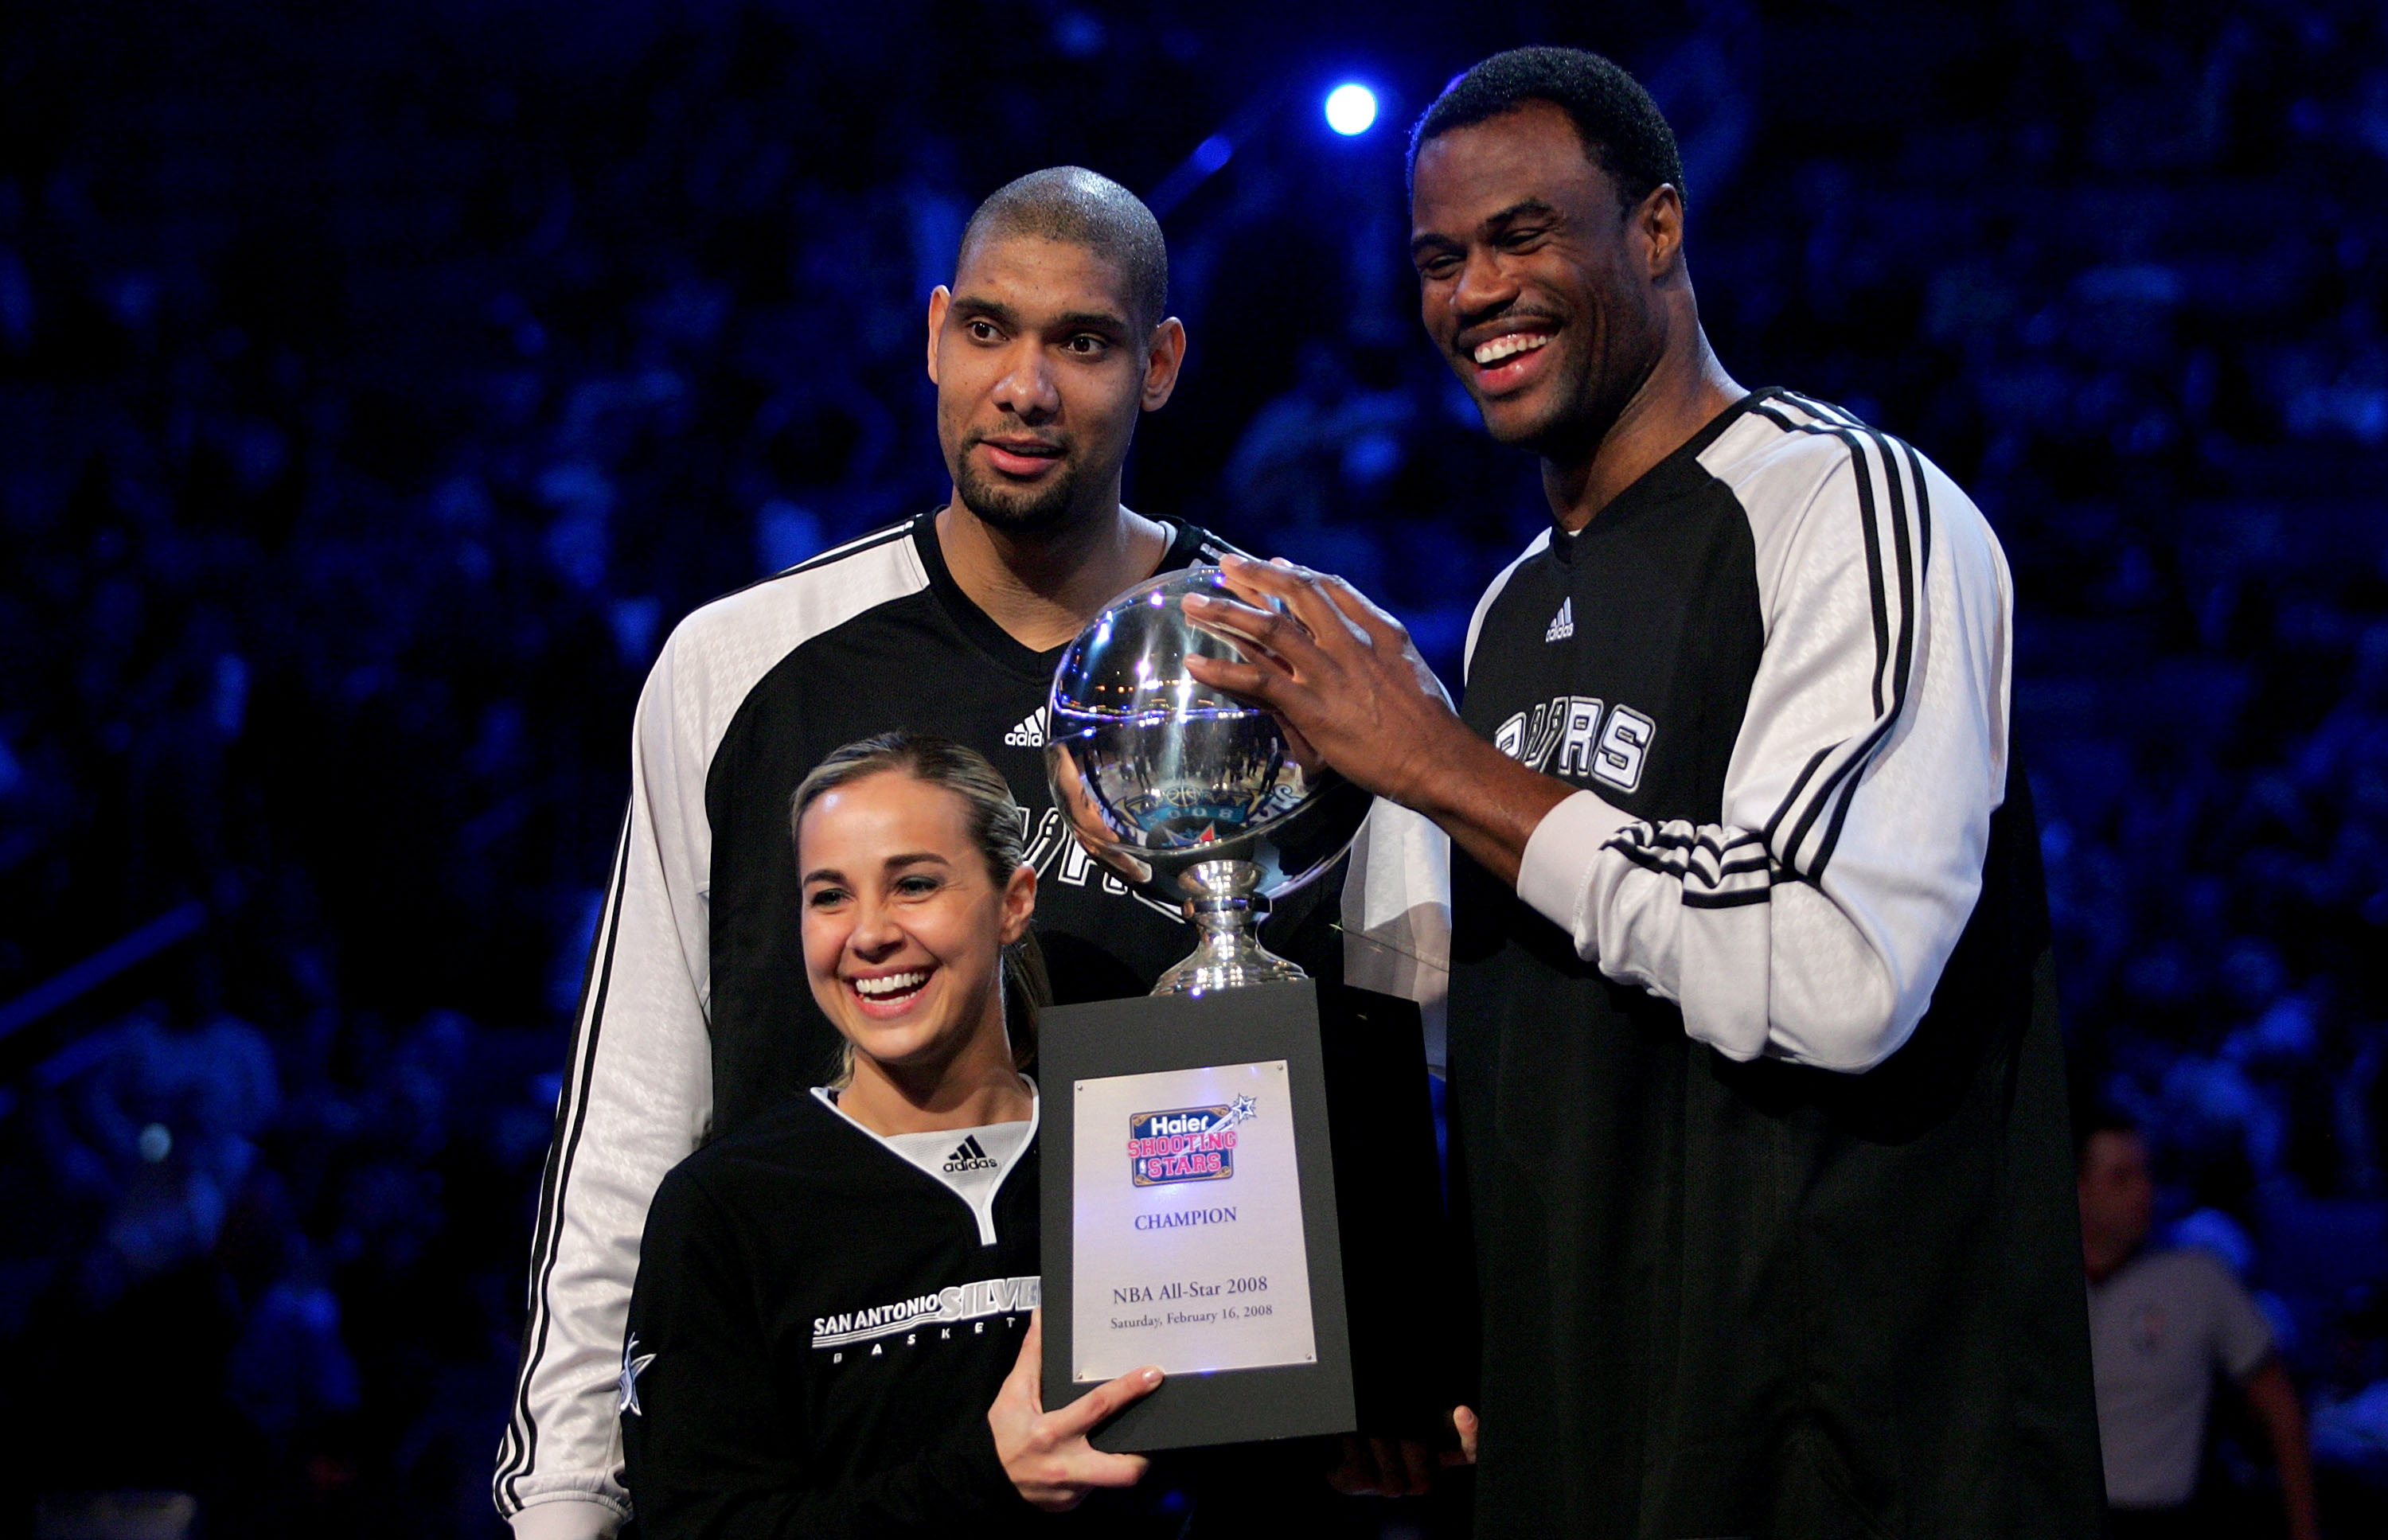 NEW ORLEANS - FEBRUARY 16:  Tim Duncan of the San Antonio Spurs, NBA legend David Robinson and WNBA player Becky Hammon of the San Antonio Silver Star pose with the championship trophy after winning the Haier Shooting Stars competition, part of 2008 NBA A